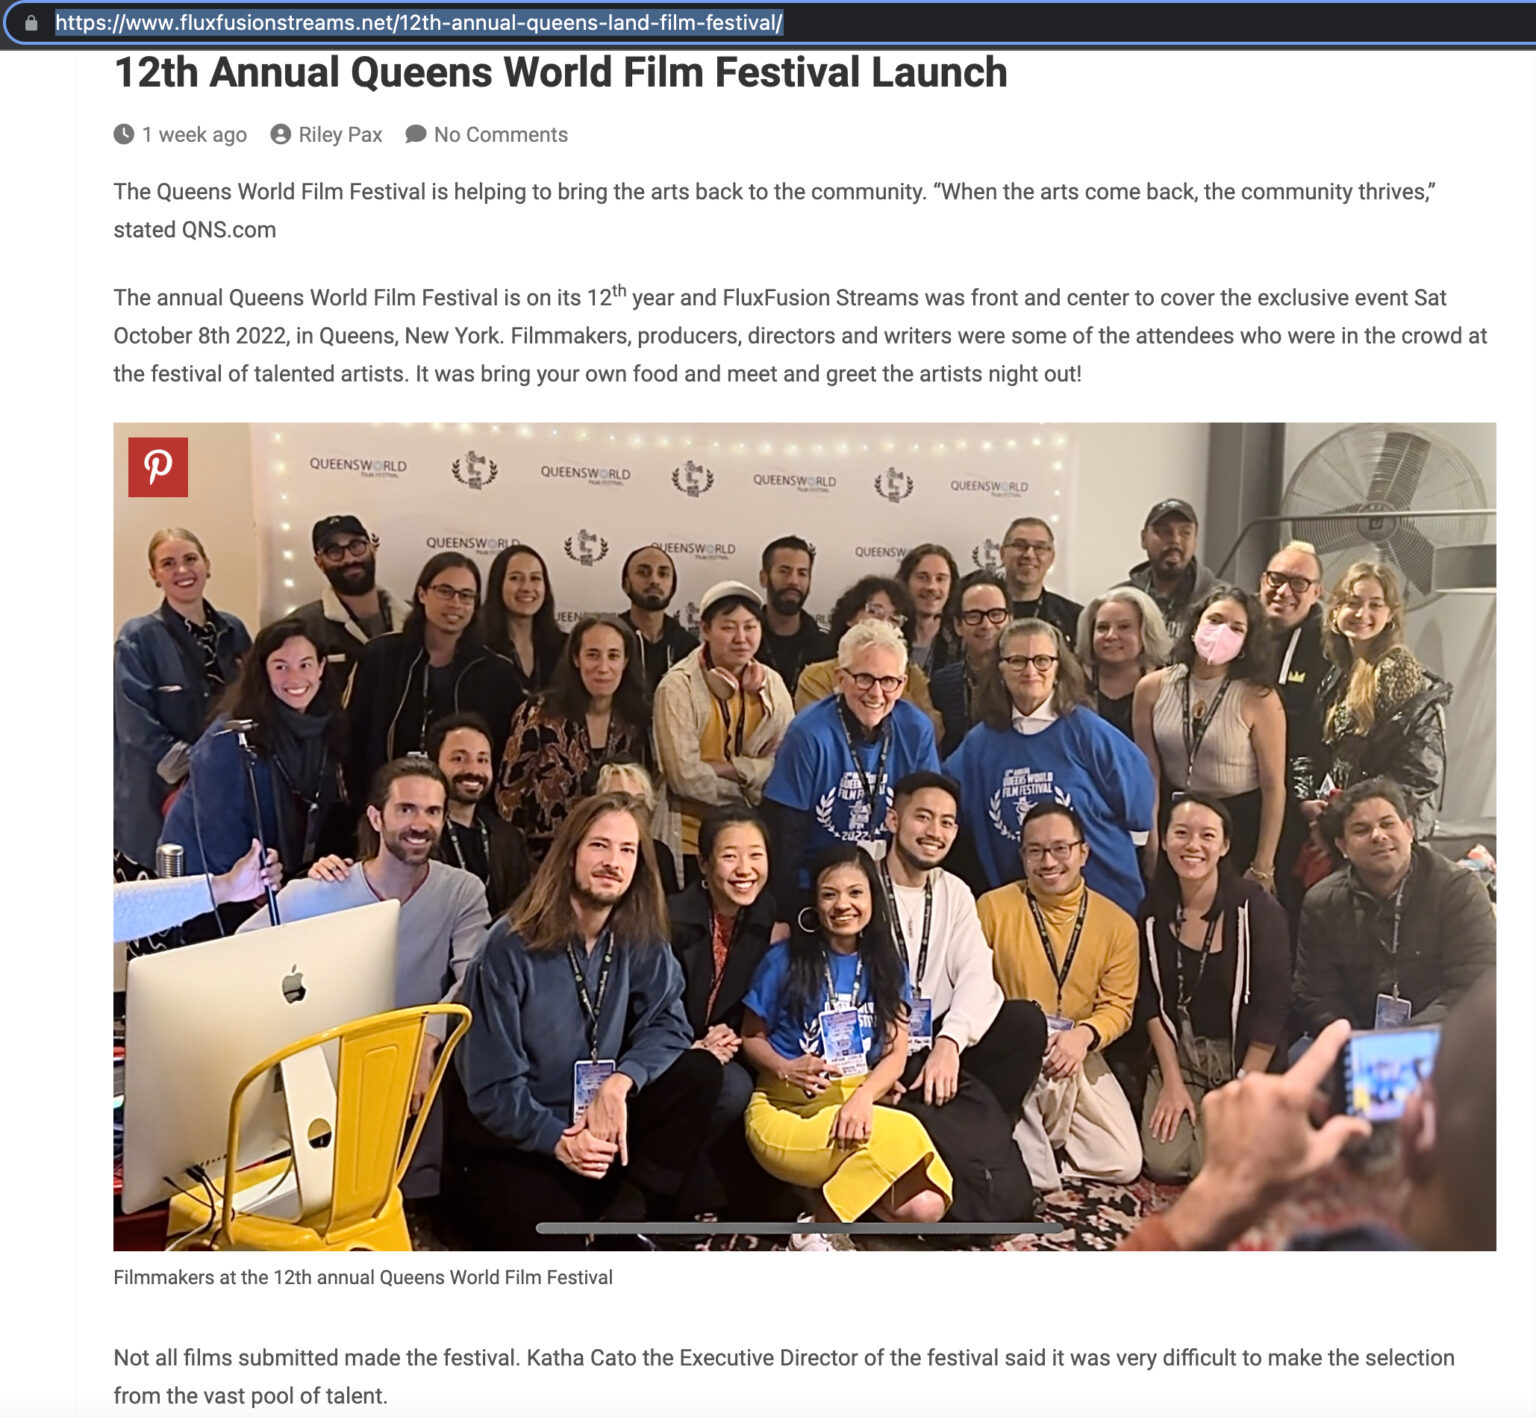 Filmmaker neha lohia with all other filmmakers from New York at the Queens World Film Festival